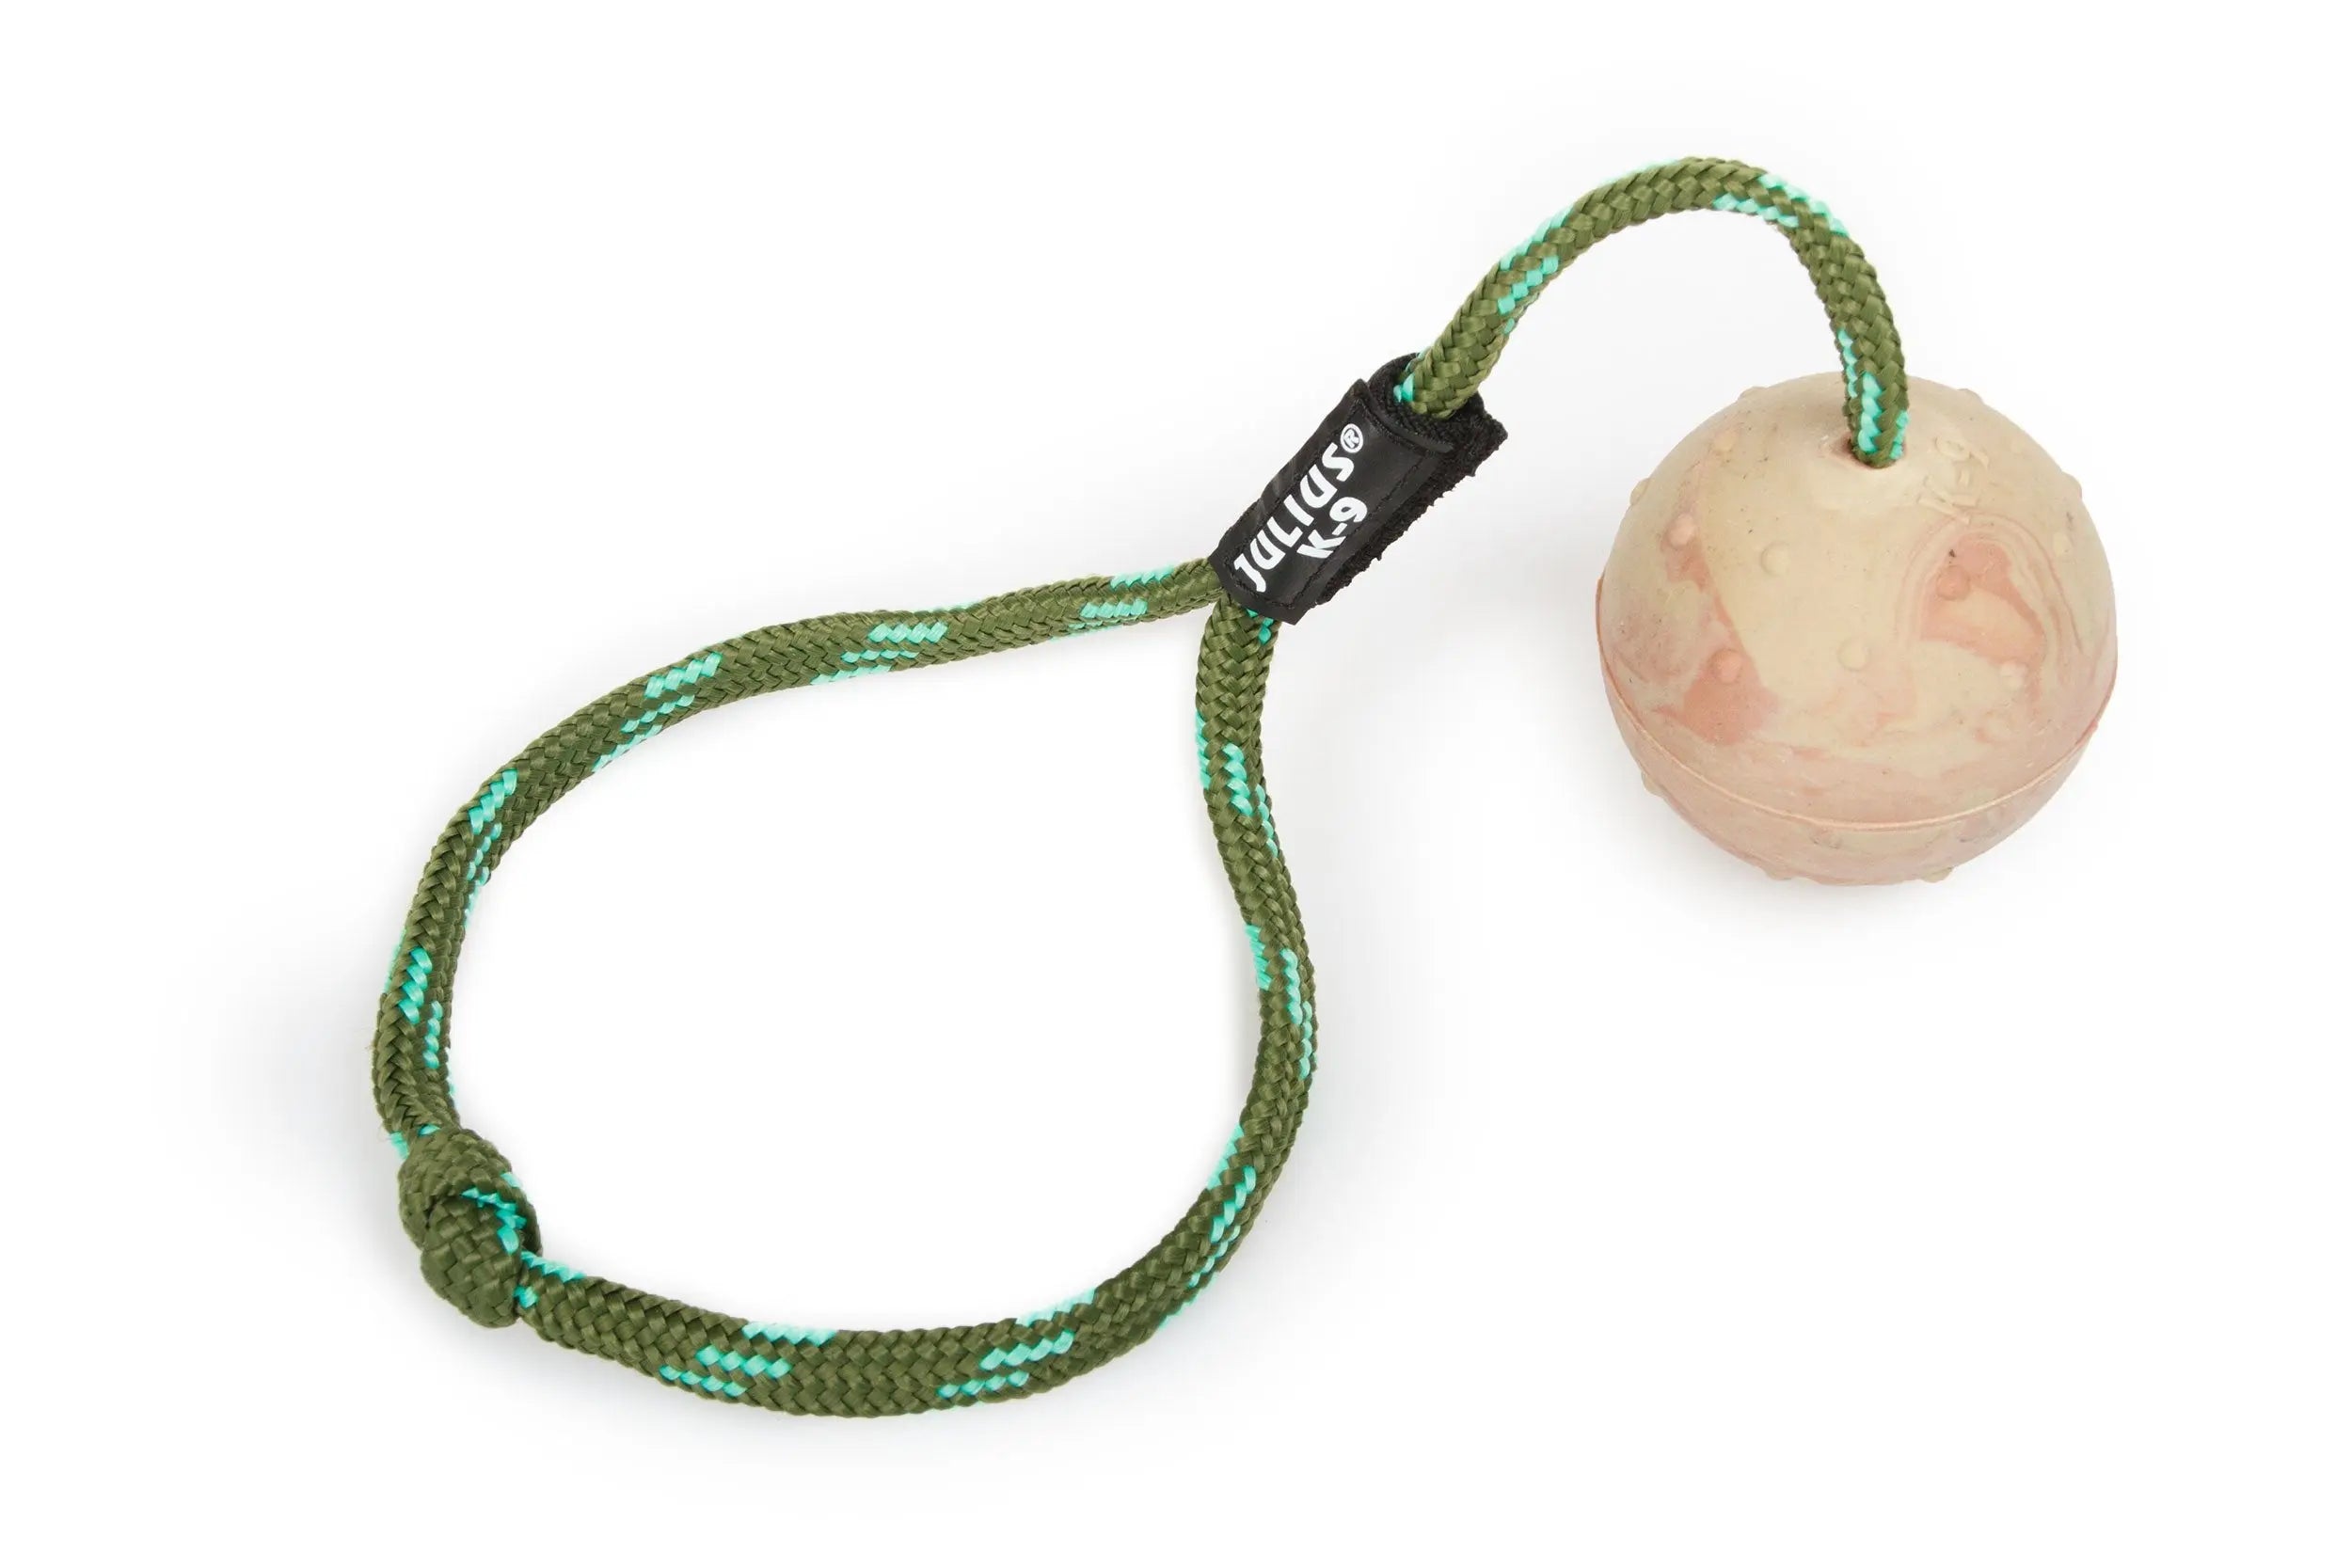 Julius-K9 IDC® Natural Rubber Ball with Closable Handle